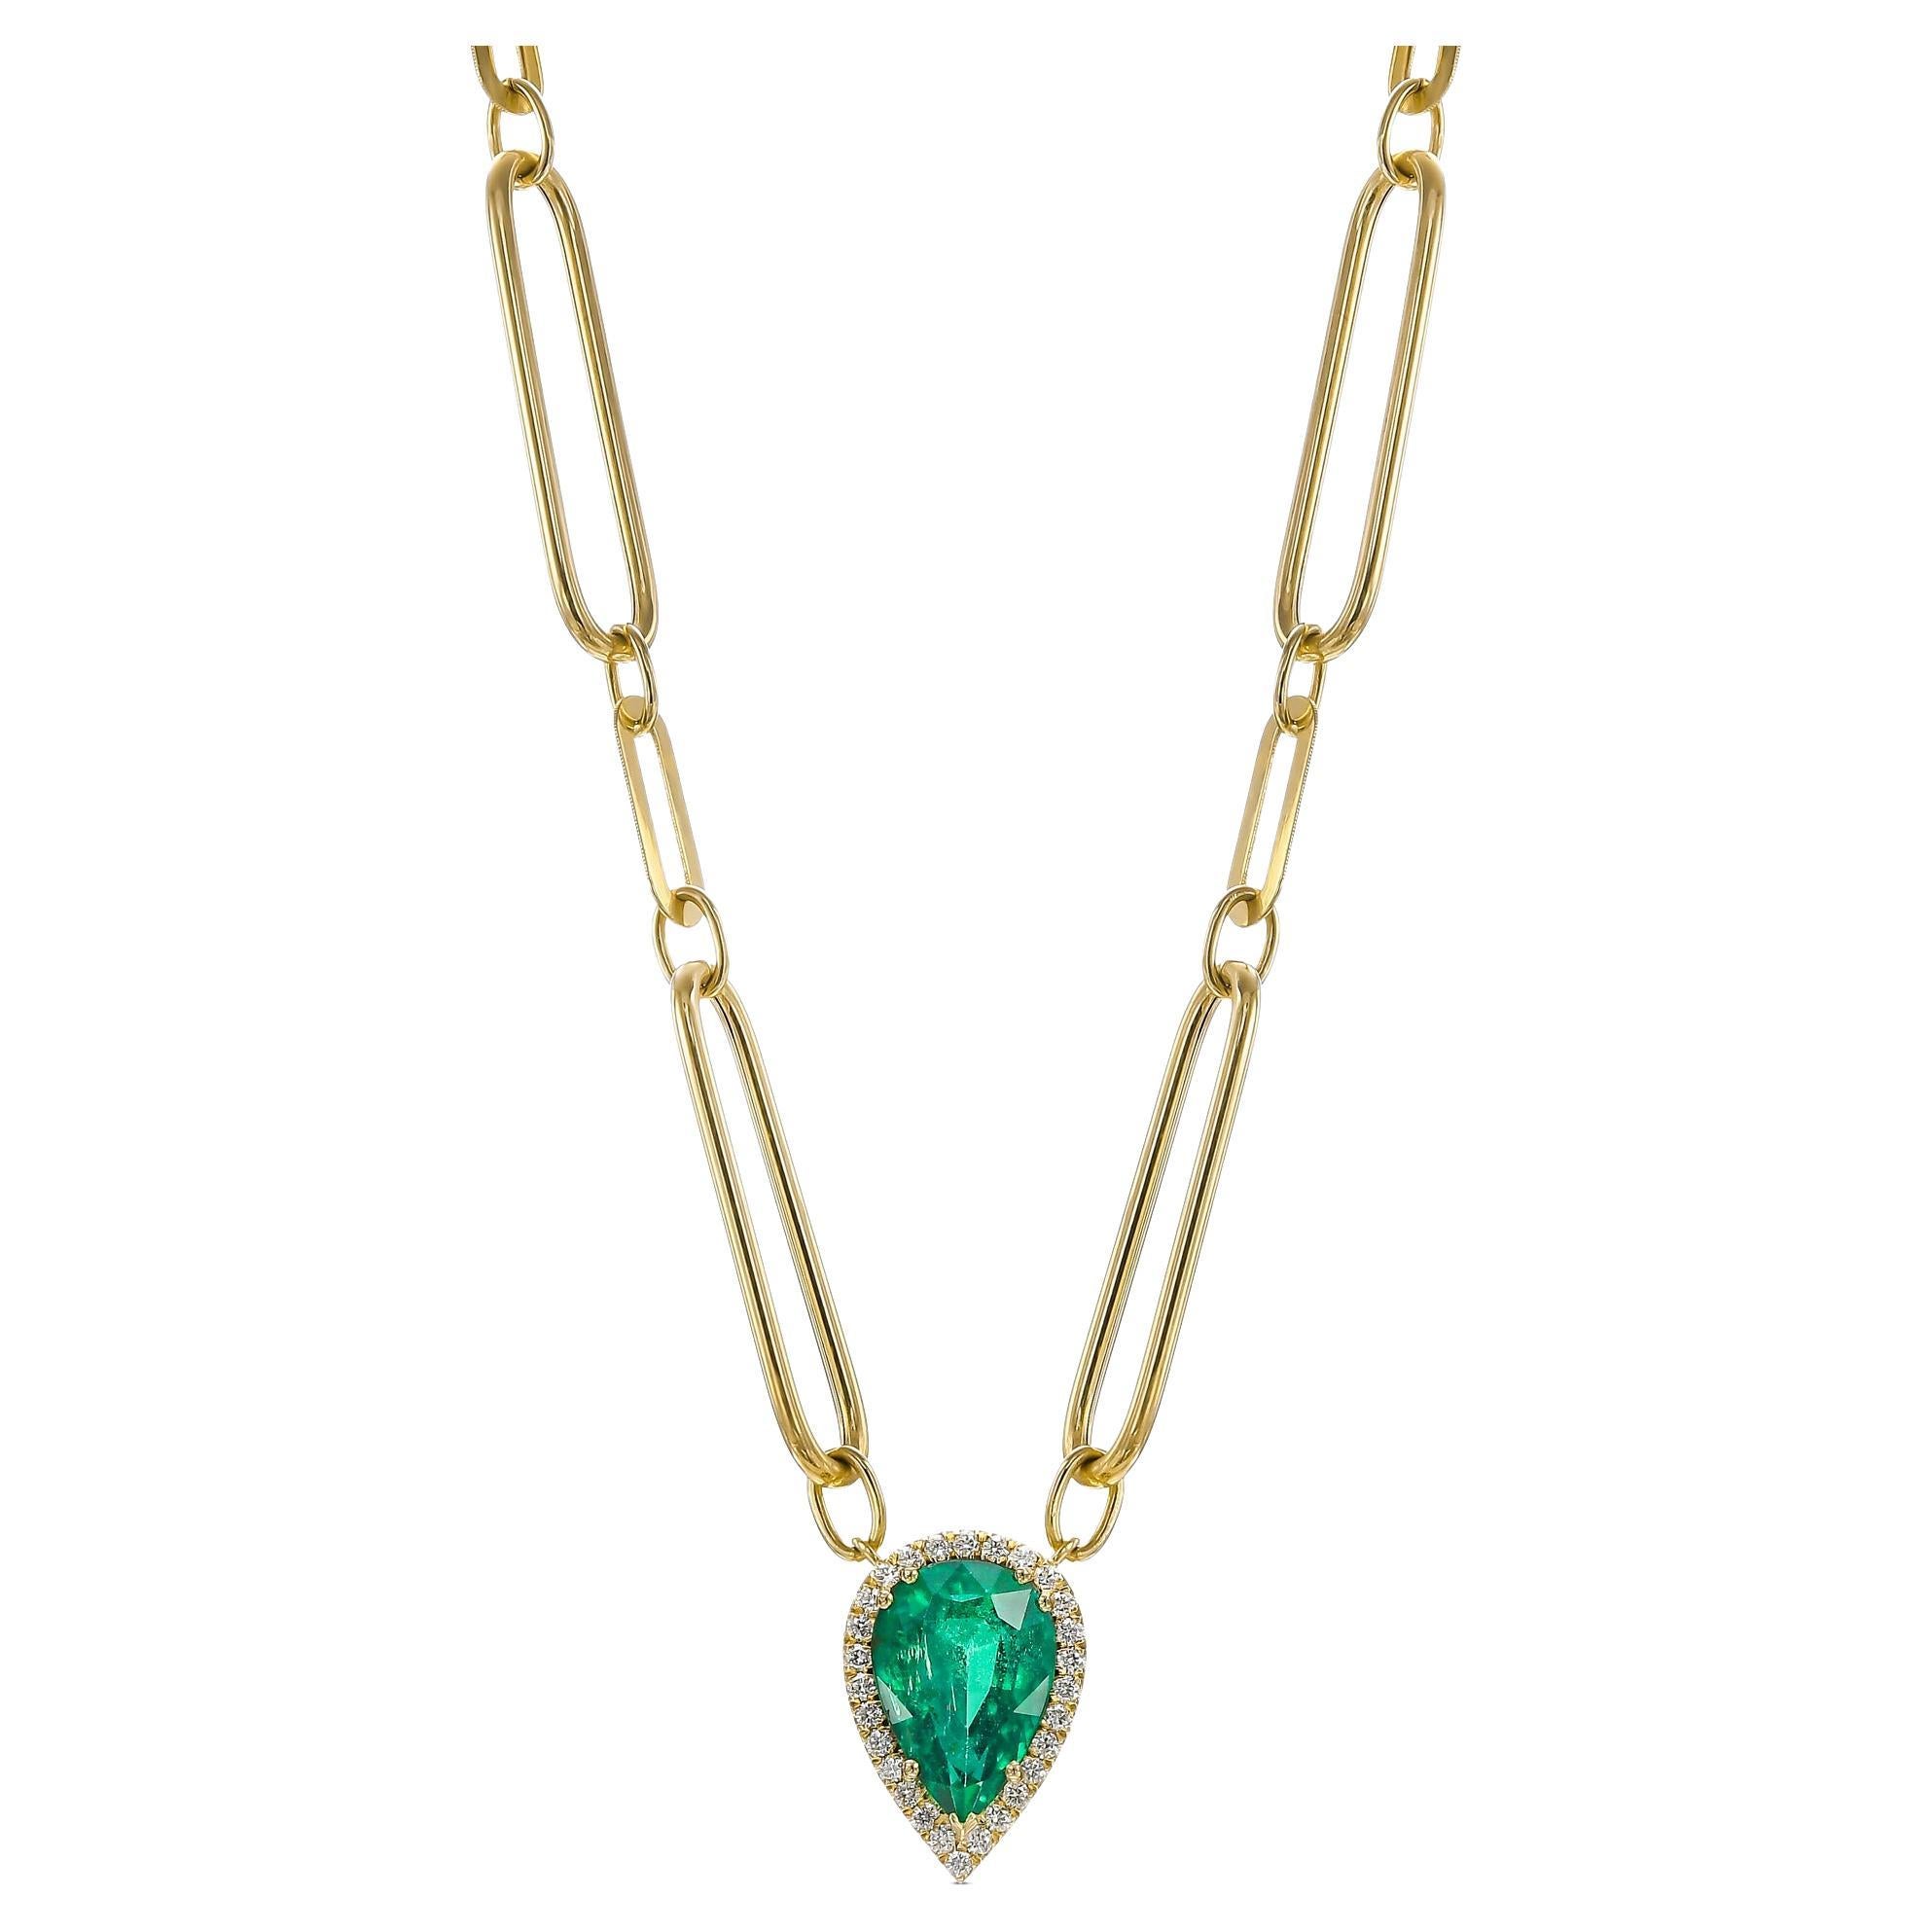 GIA Certified 3.59 Carat Pear Shape Emerald Necklace with Diamonds